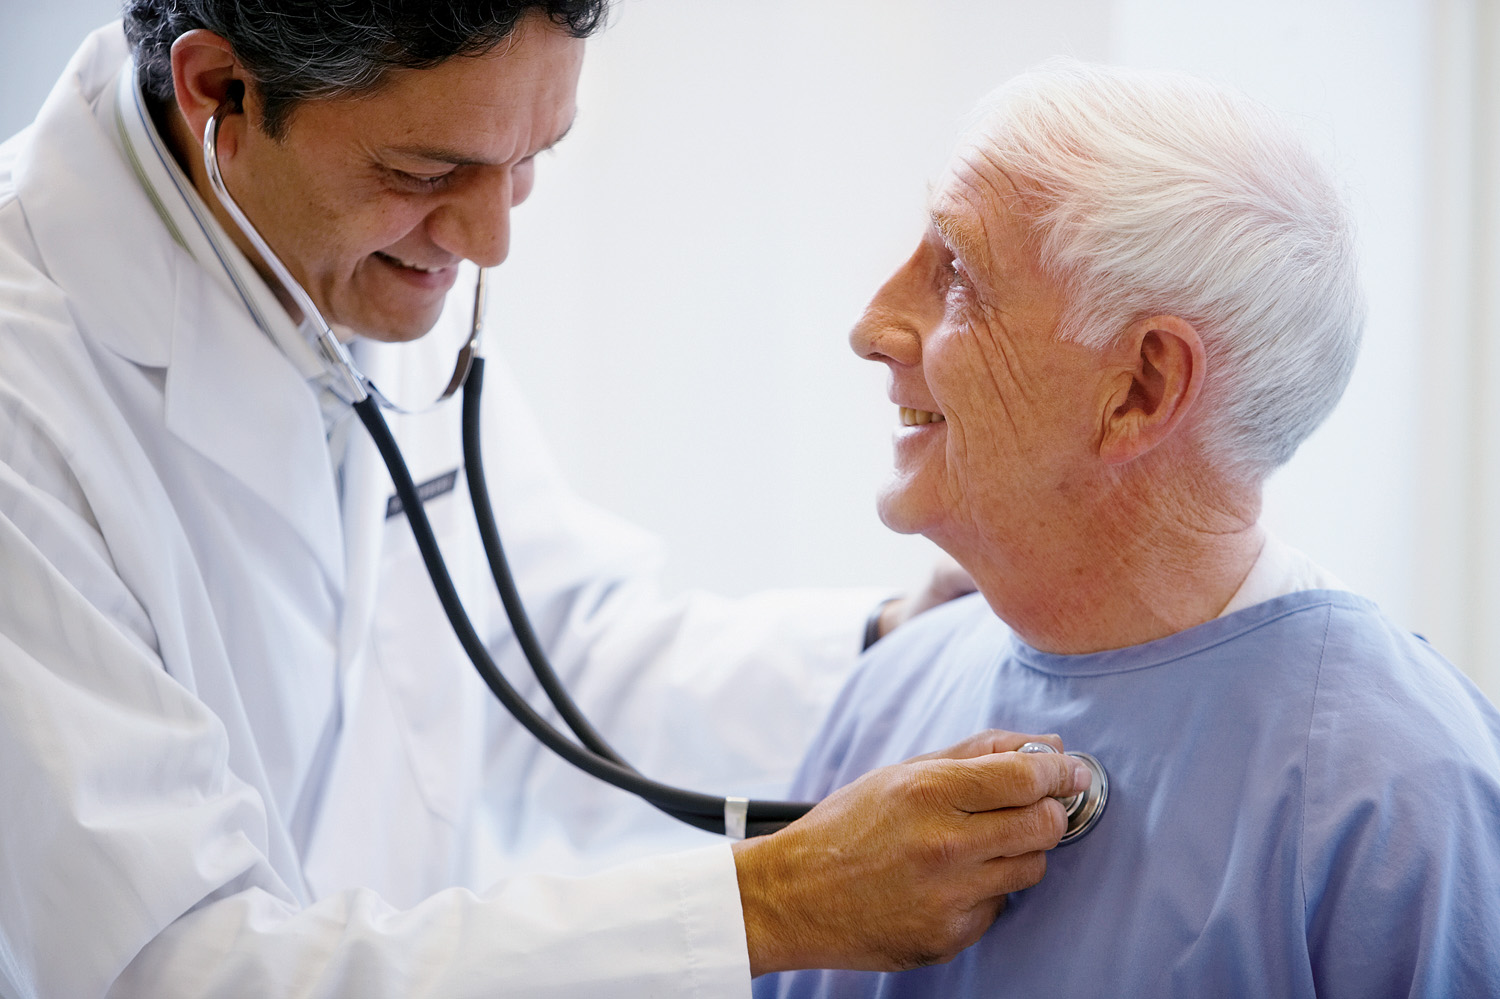 doctor holding stethoscope to older male patient's chest